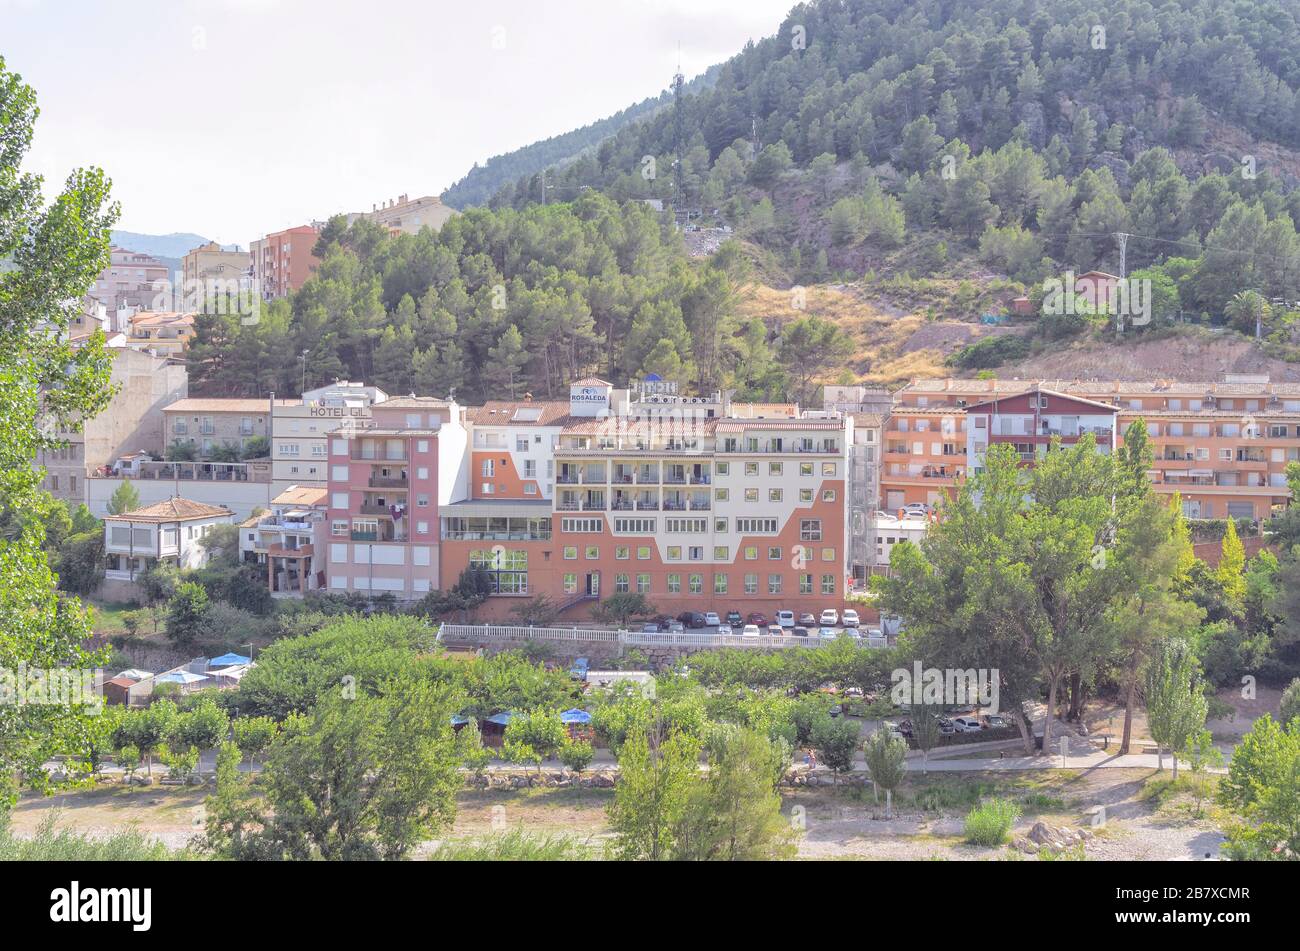 View of 'Rosaleda del Mijares' and 'Gil' hotels. Tourist village of Montanejos, in the region of Castellon (Valencia - Spain). Stock Photo